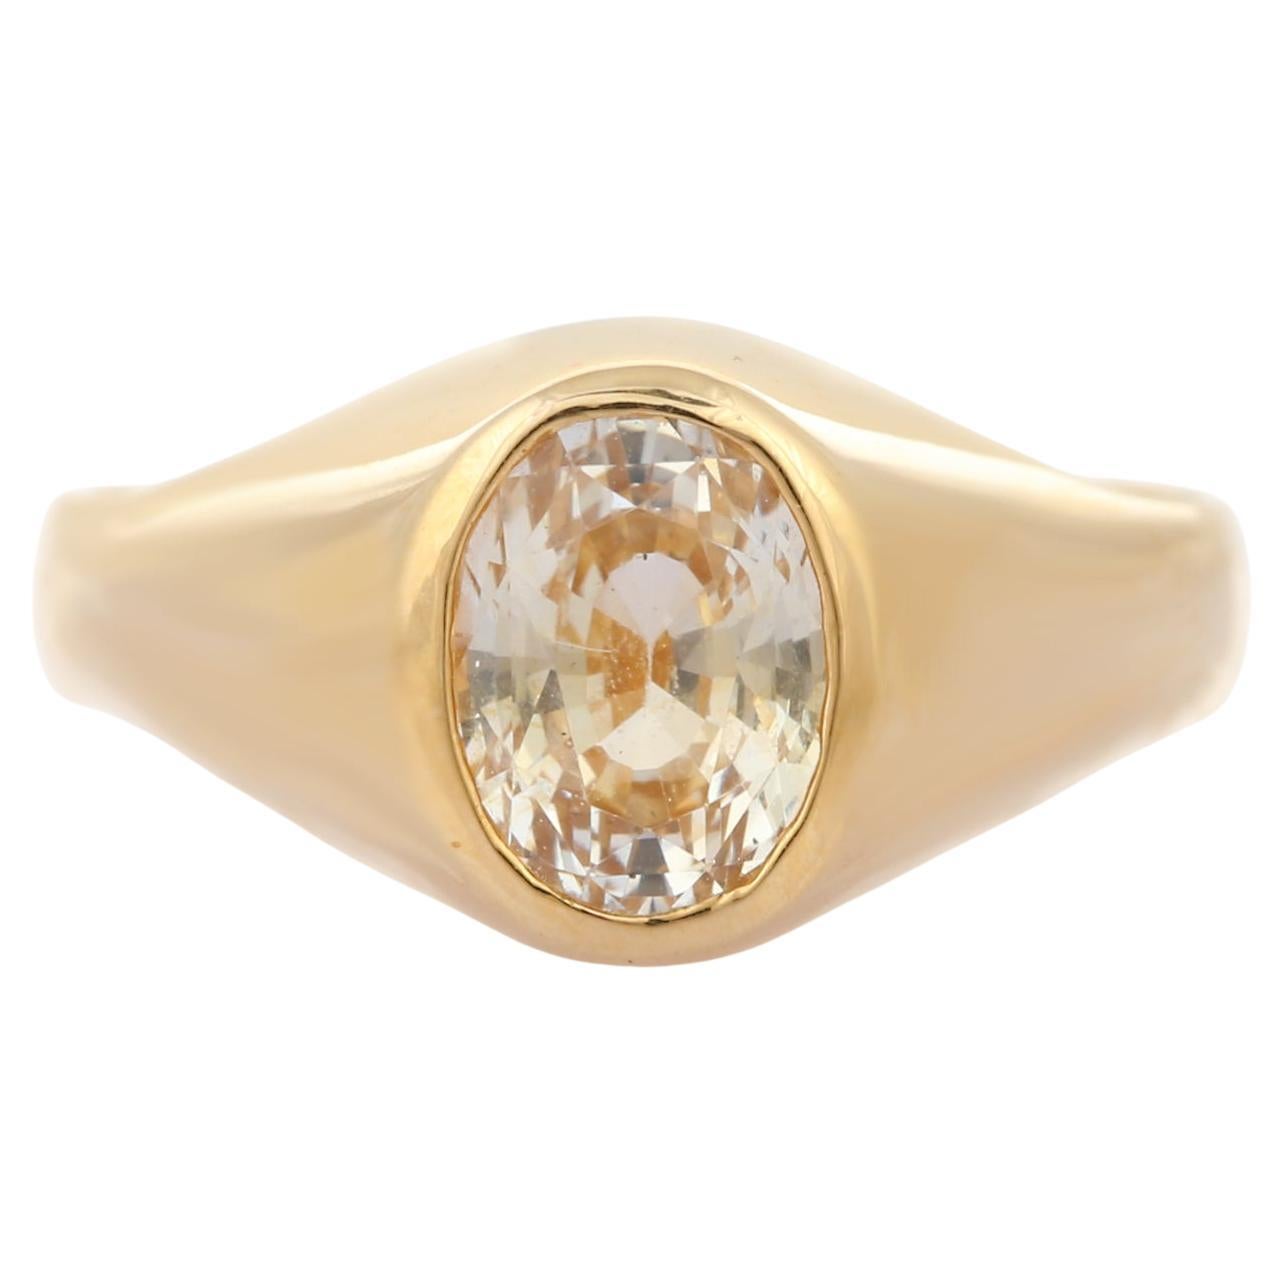 2.19 Carat Oval Cut Yellow Sapphire Solitaire Ring in 18 Karat Yellow Gold